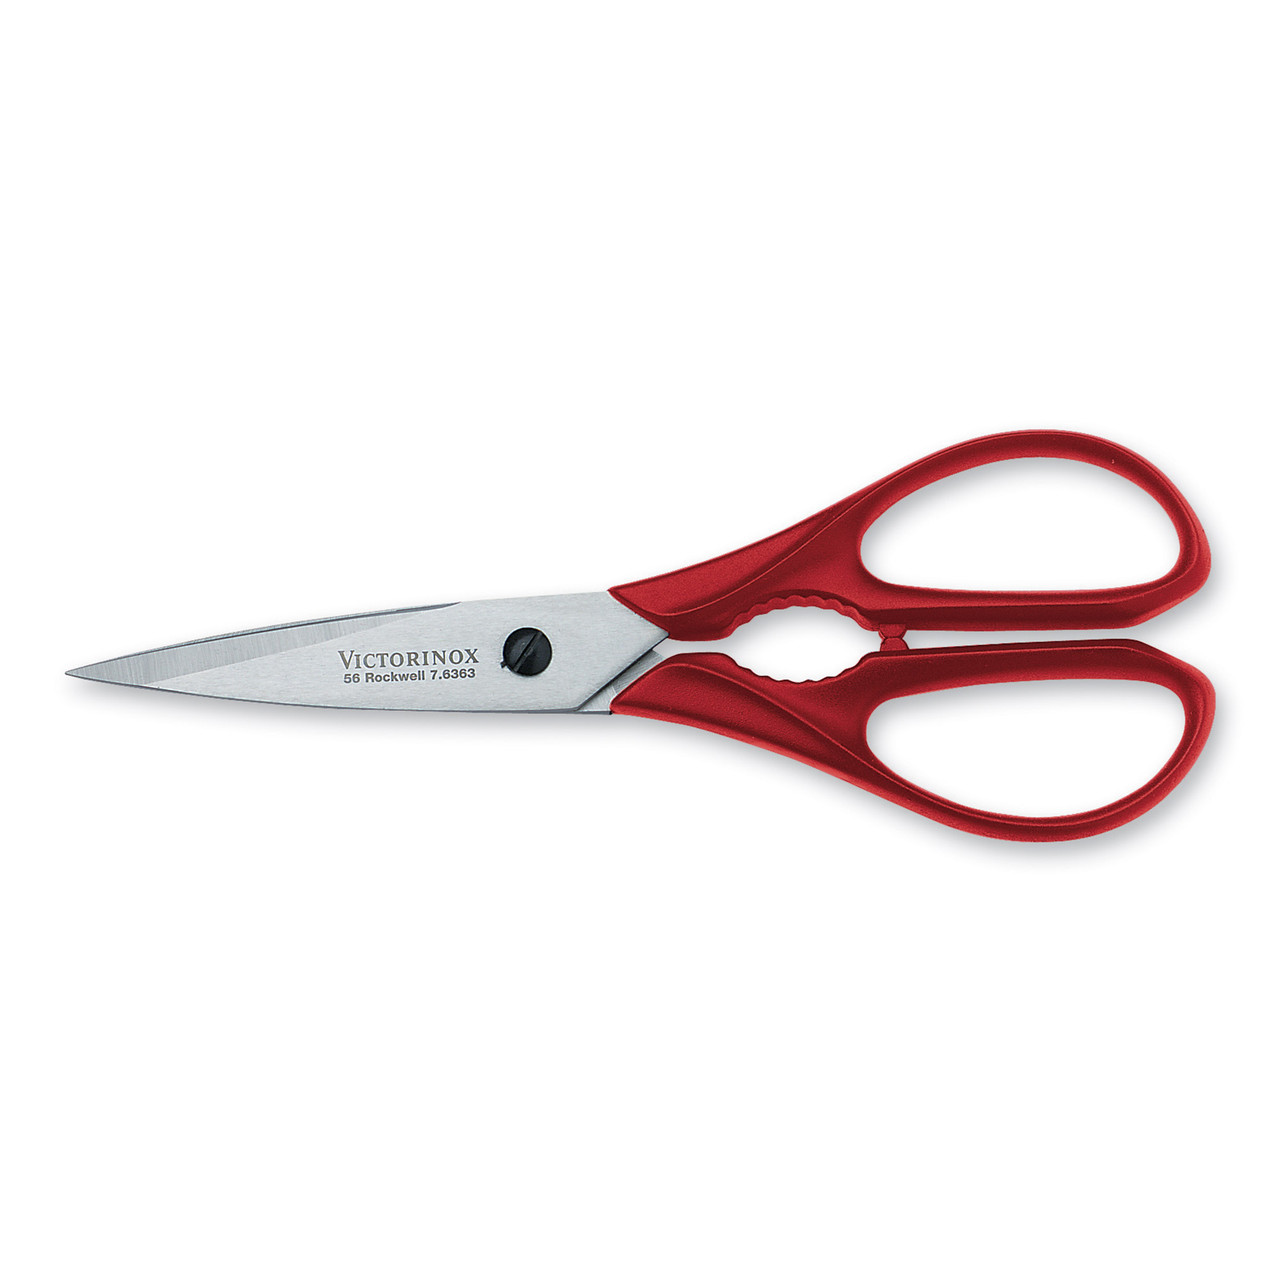 https://www.hospitalitydirectory.com.au/images/product_images/Victorinox/Showcases/2024/Accessories/MULTI%20PURPOSE%20KITCHEN%20SHEARS.jpg